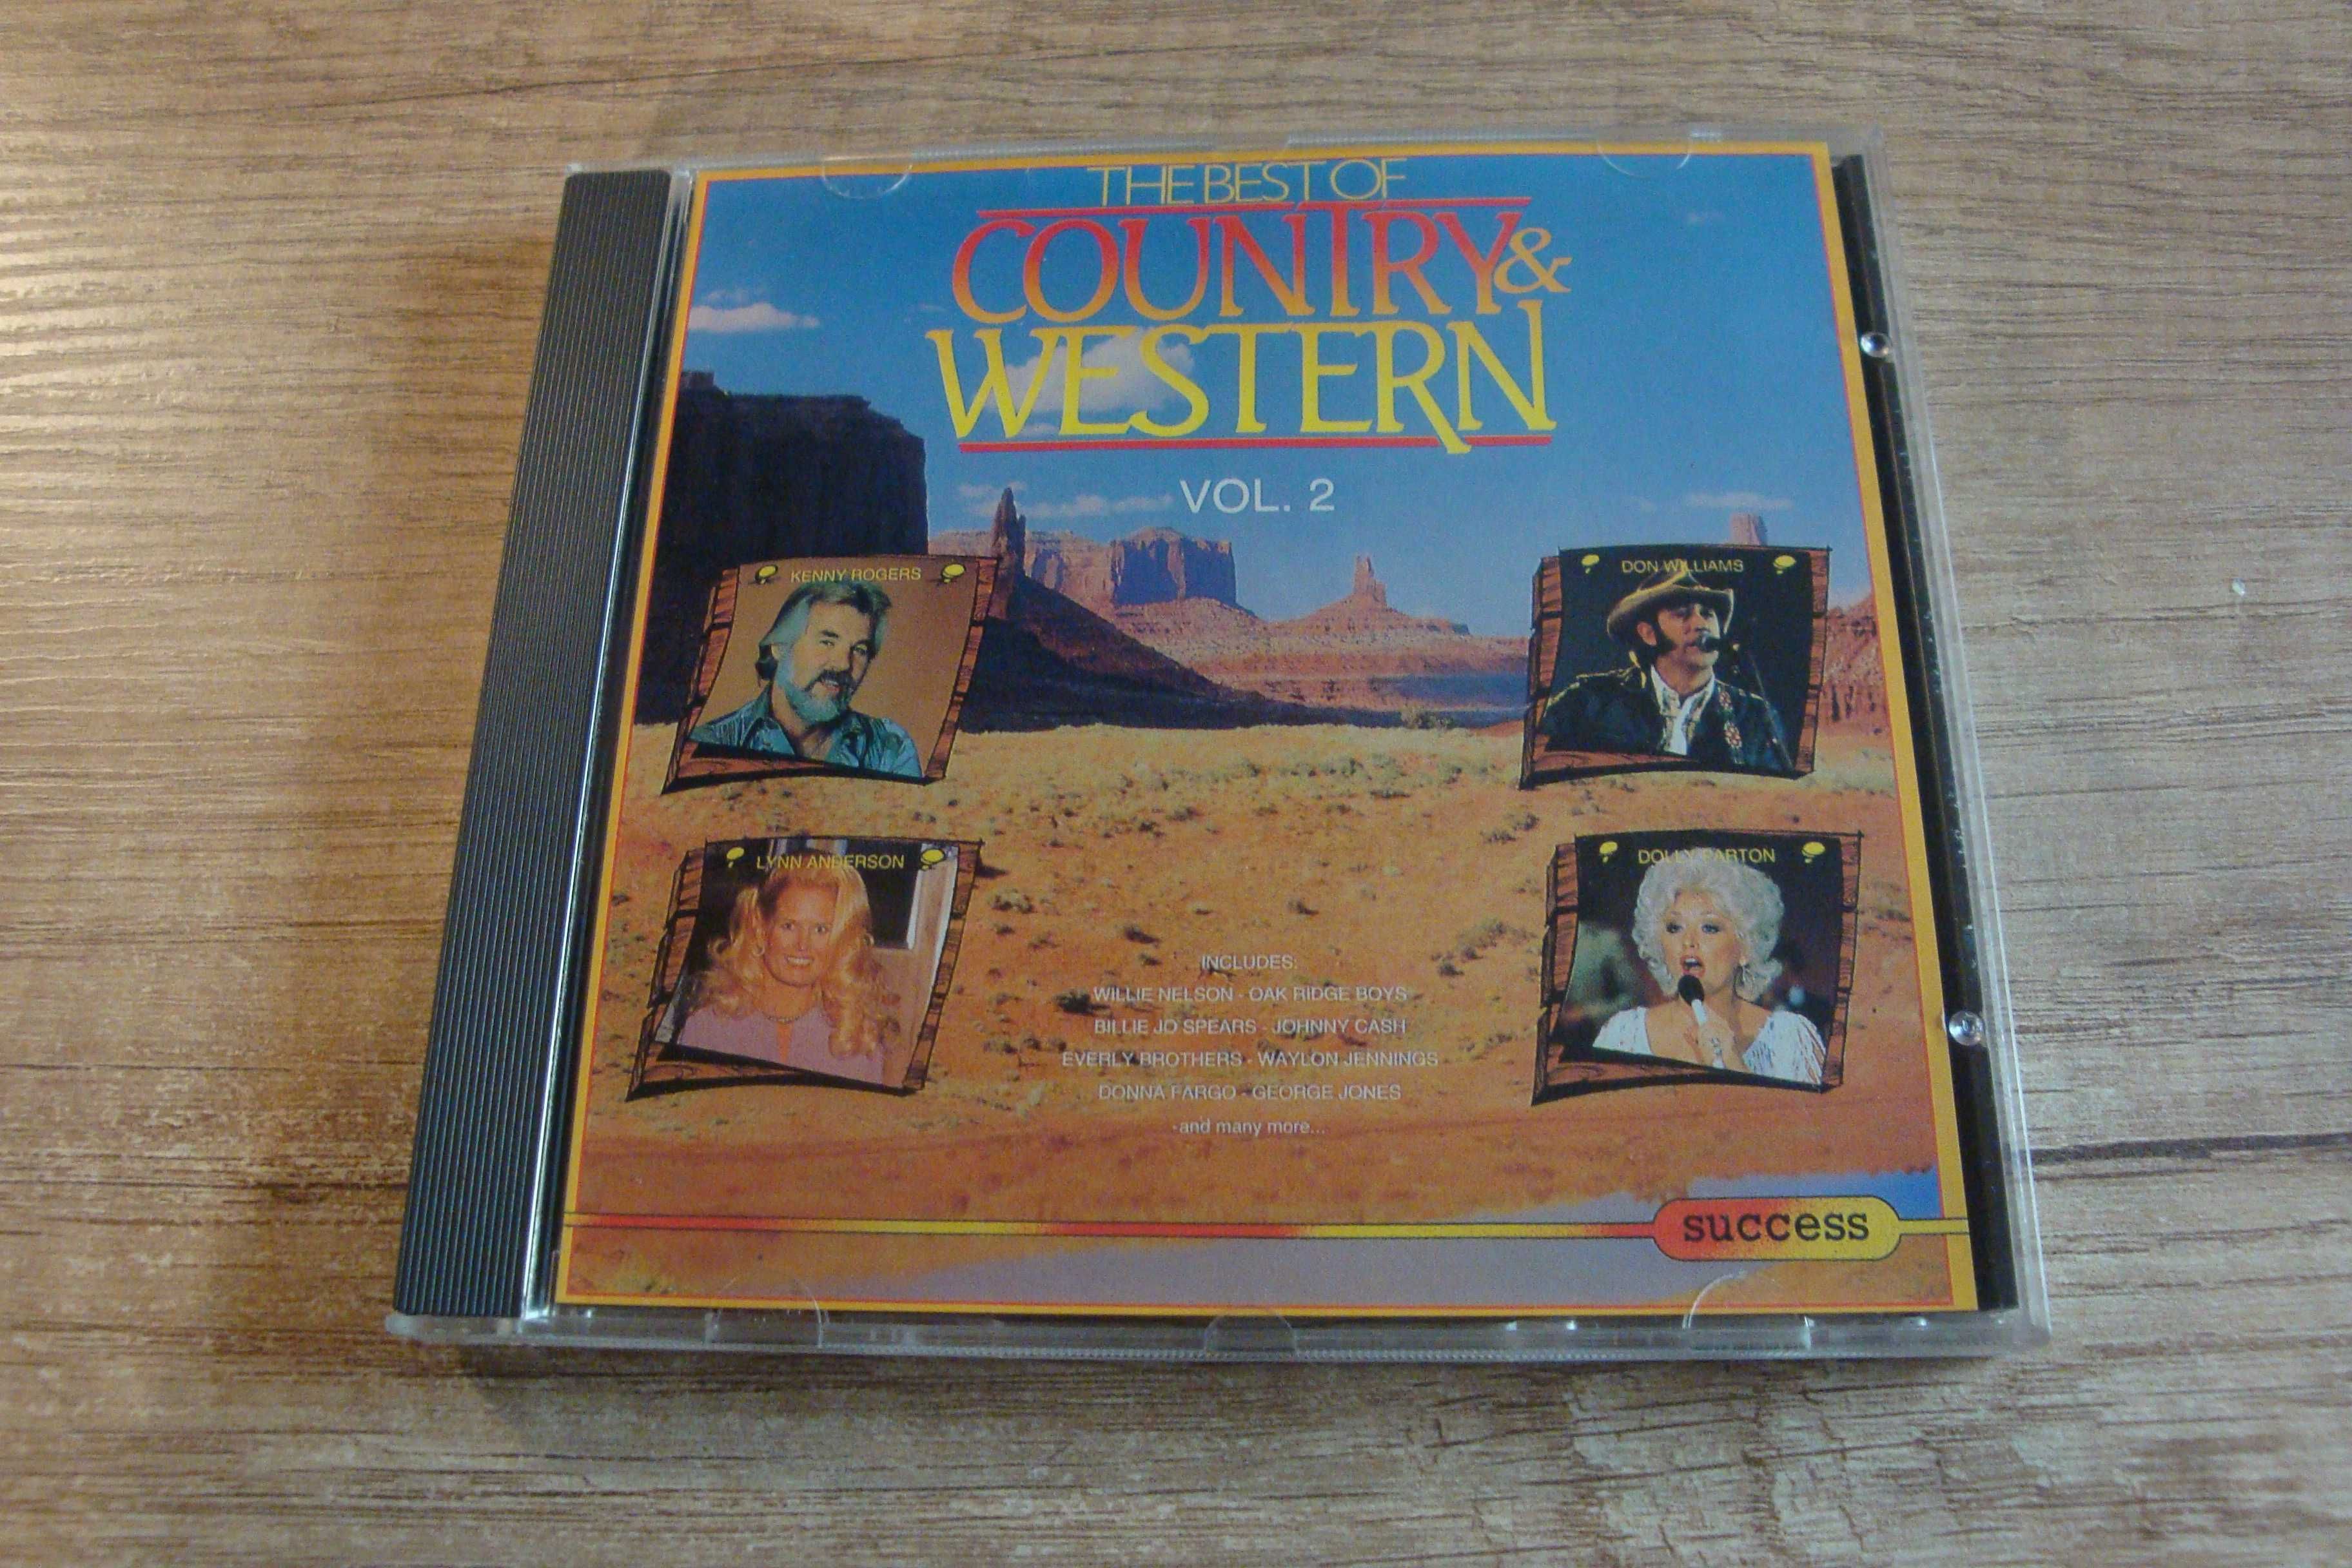 The Best Of Country & Western Vol. 2 (Johnny Cash Dolly Parton)